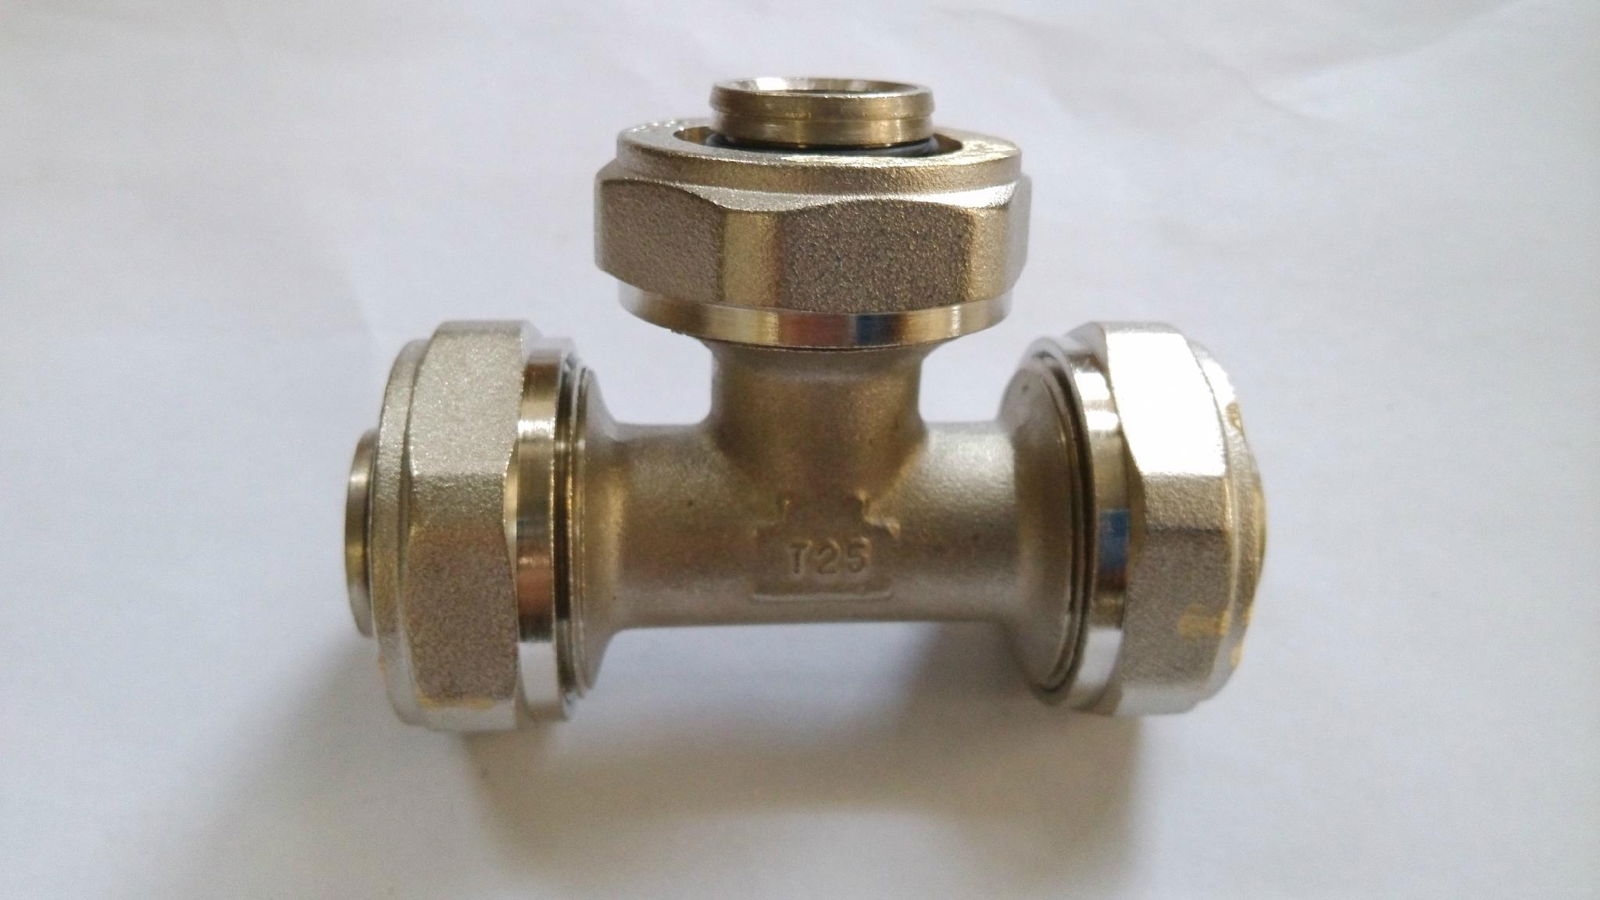 compression fitting tees for pex-al pipes 4